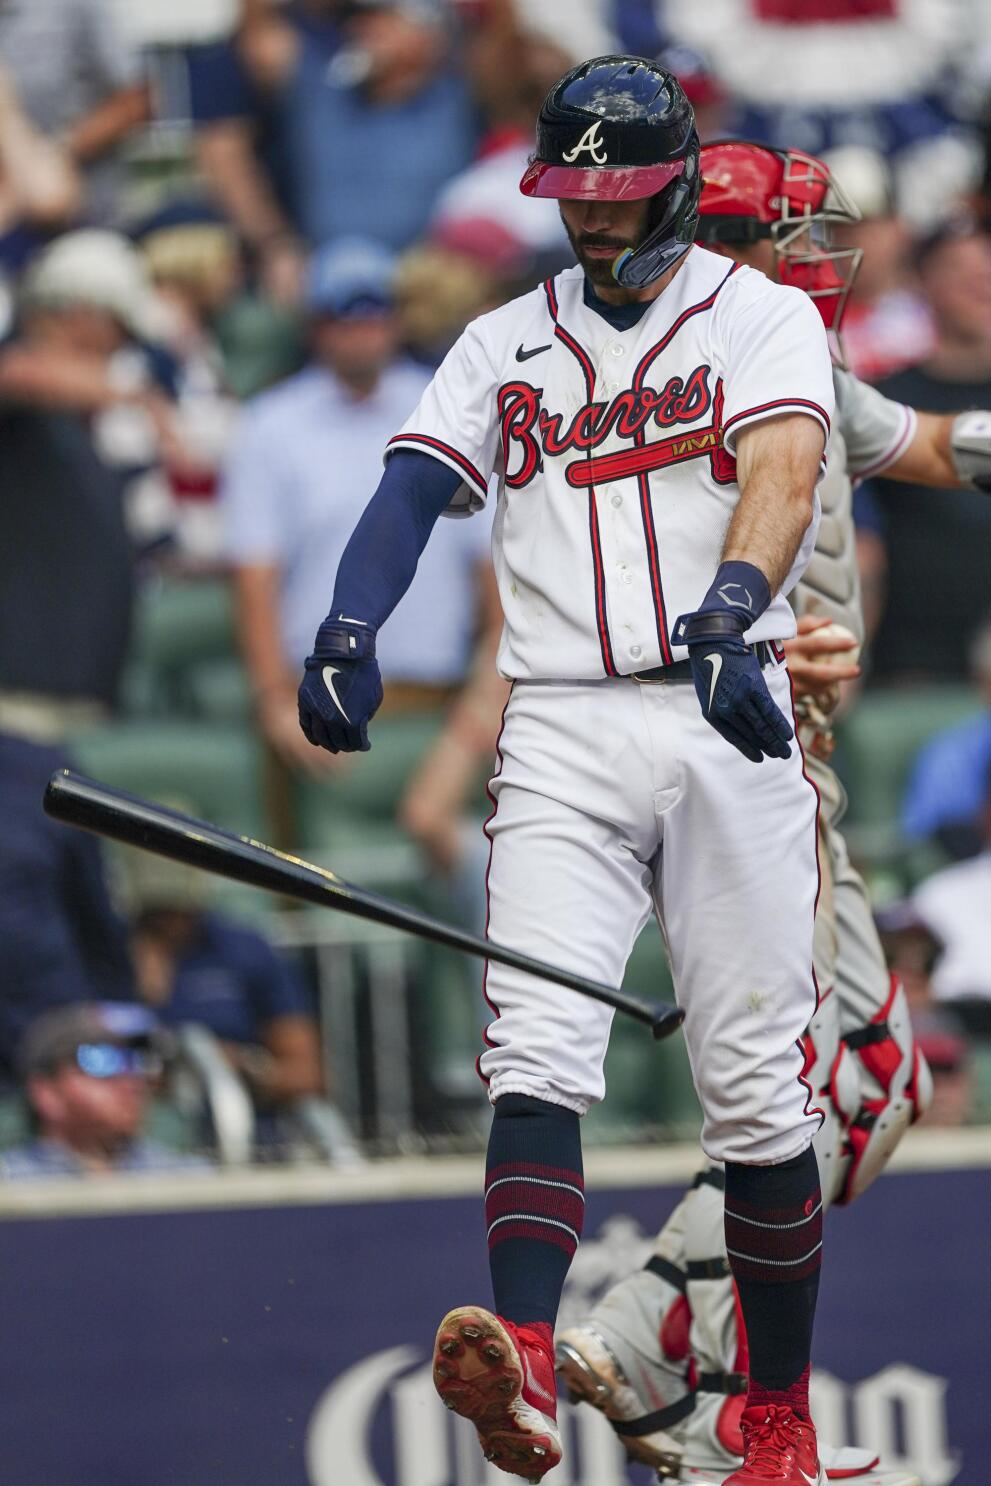 Defending champion Braves not themselves in Game 1 NLDS loss